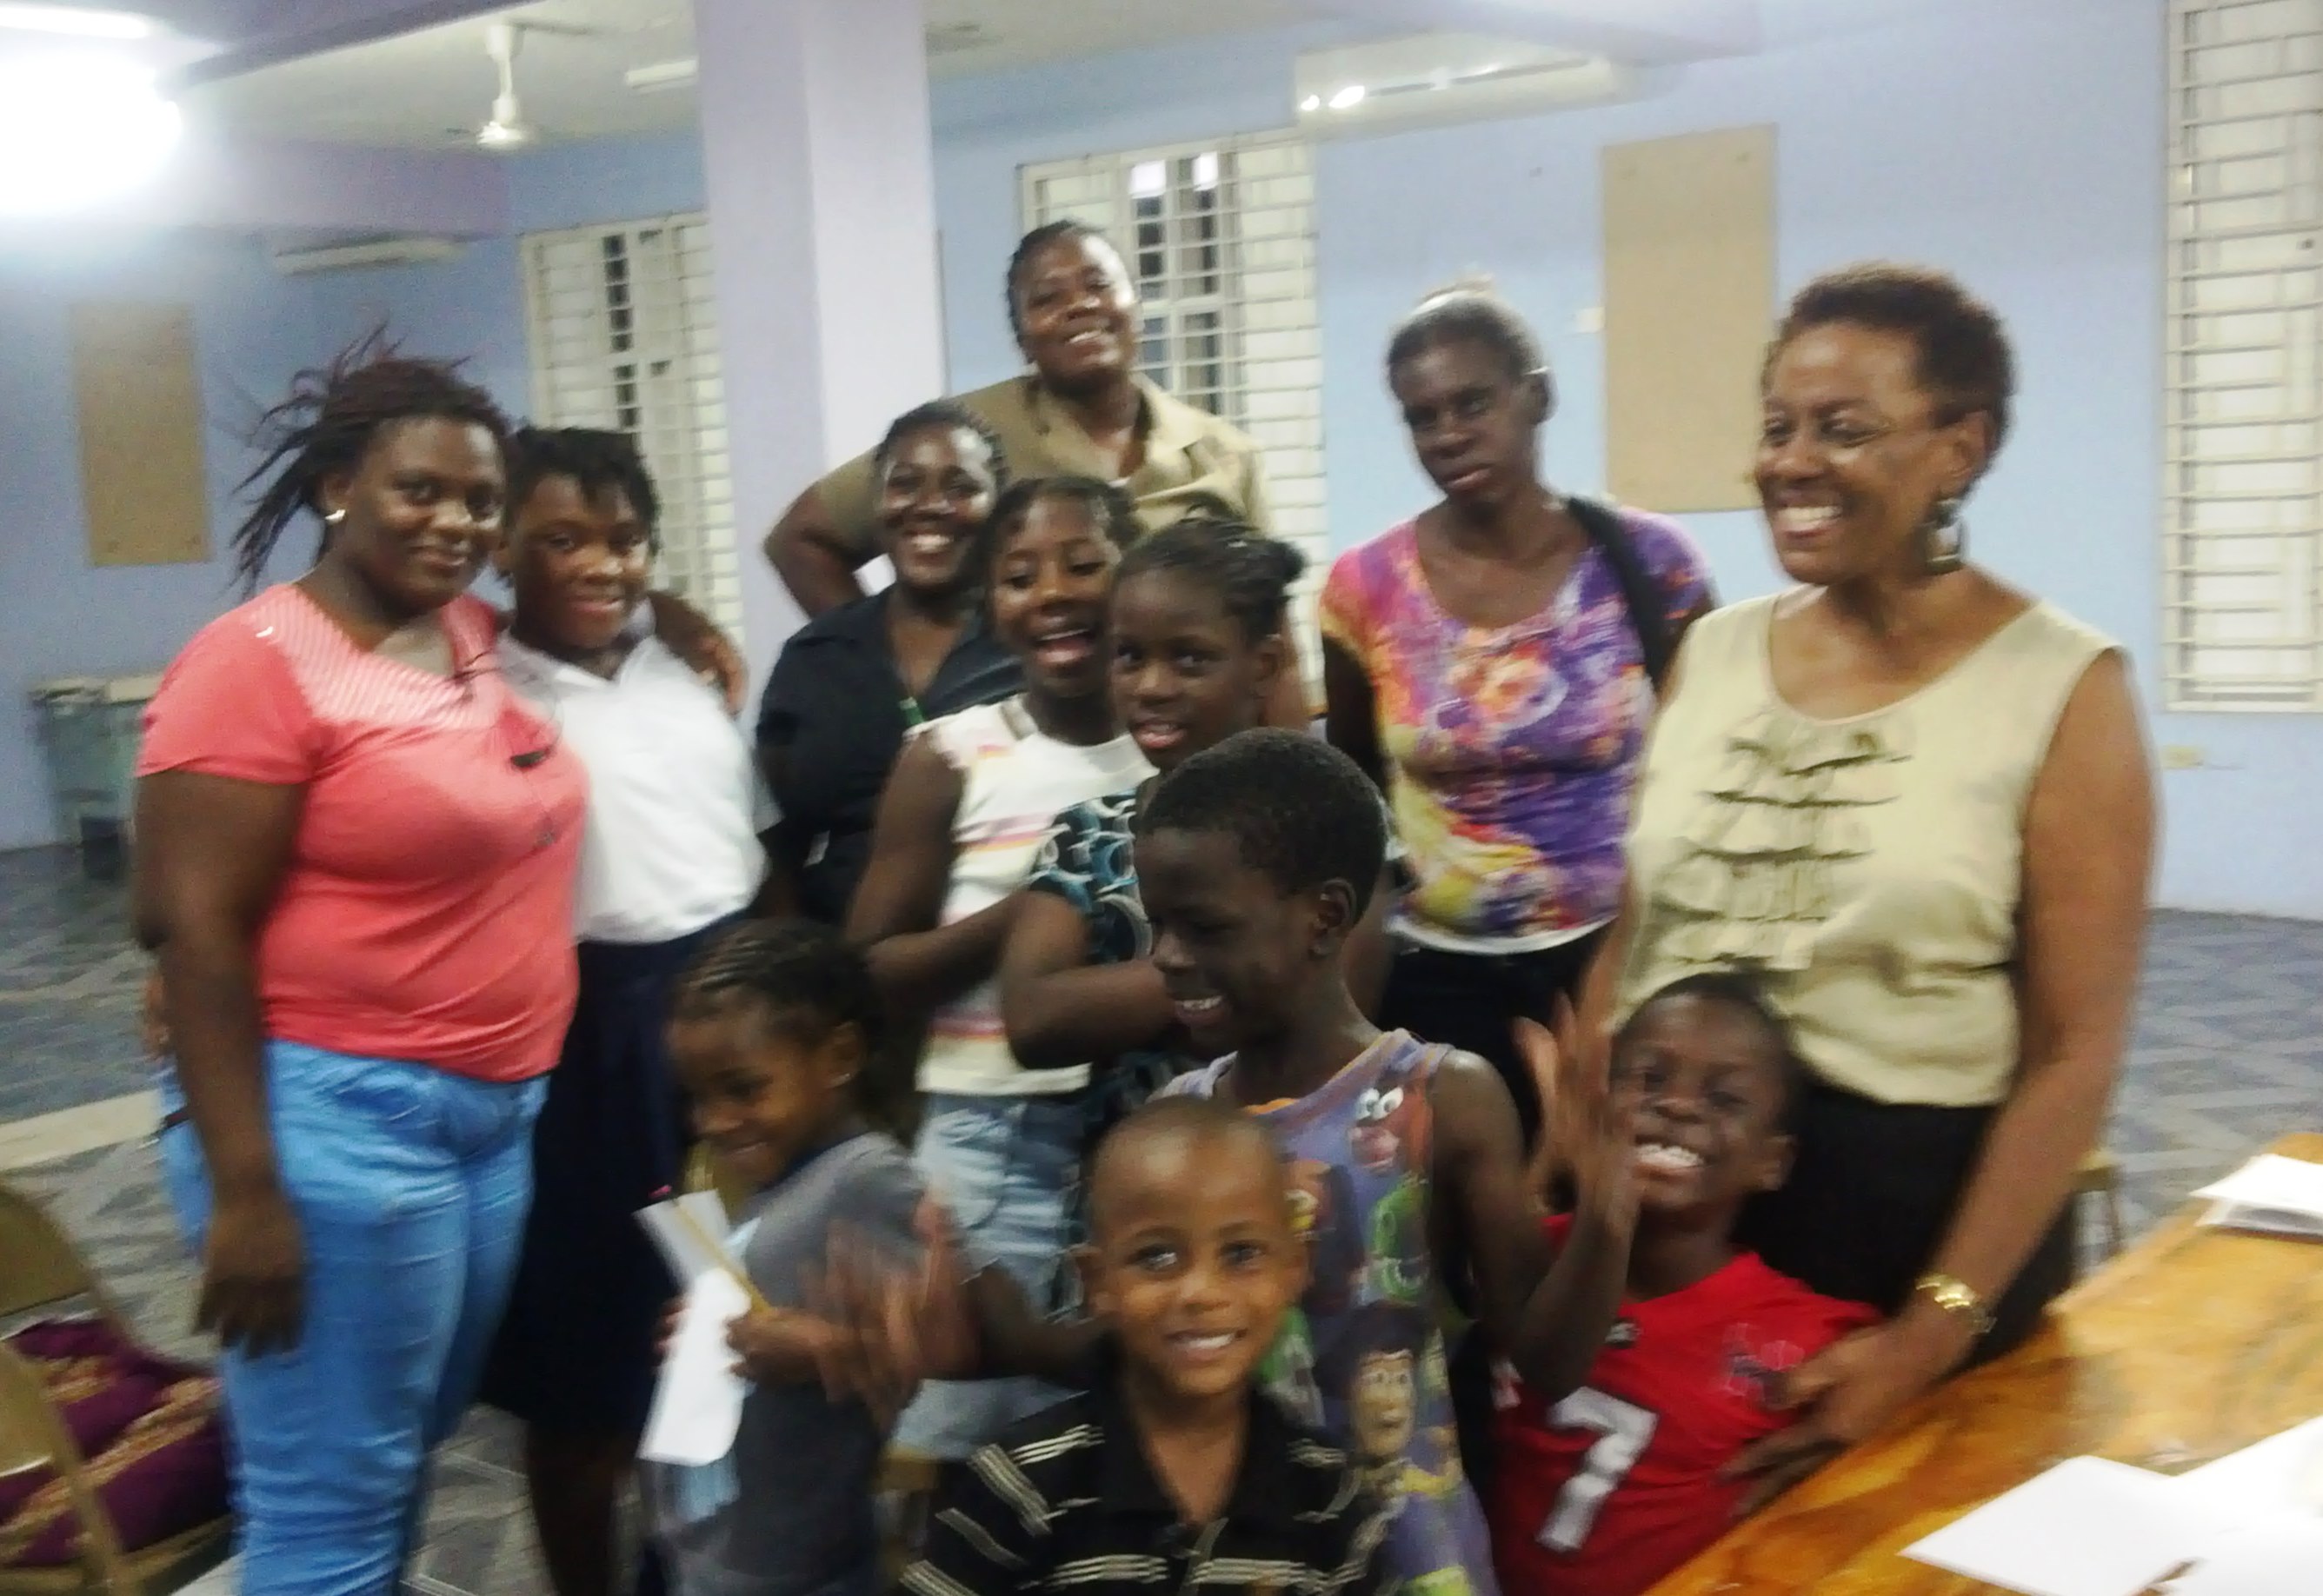 Mrs. Marva Greig (far right) hosts Parenting Workshop for parents of children who attend the Centre